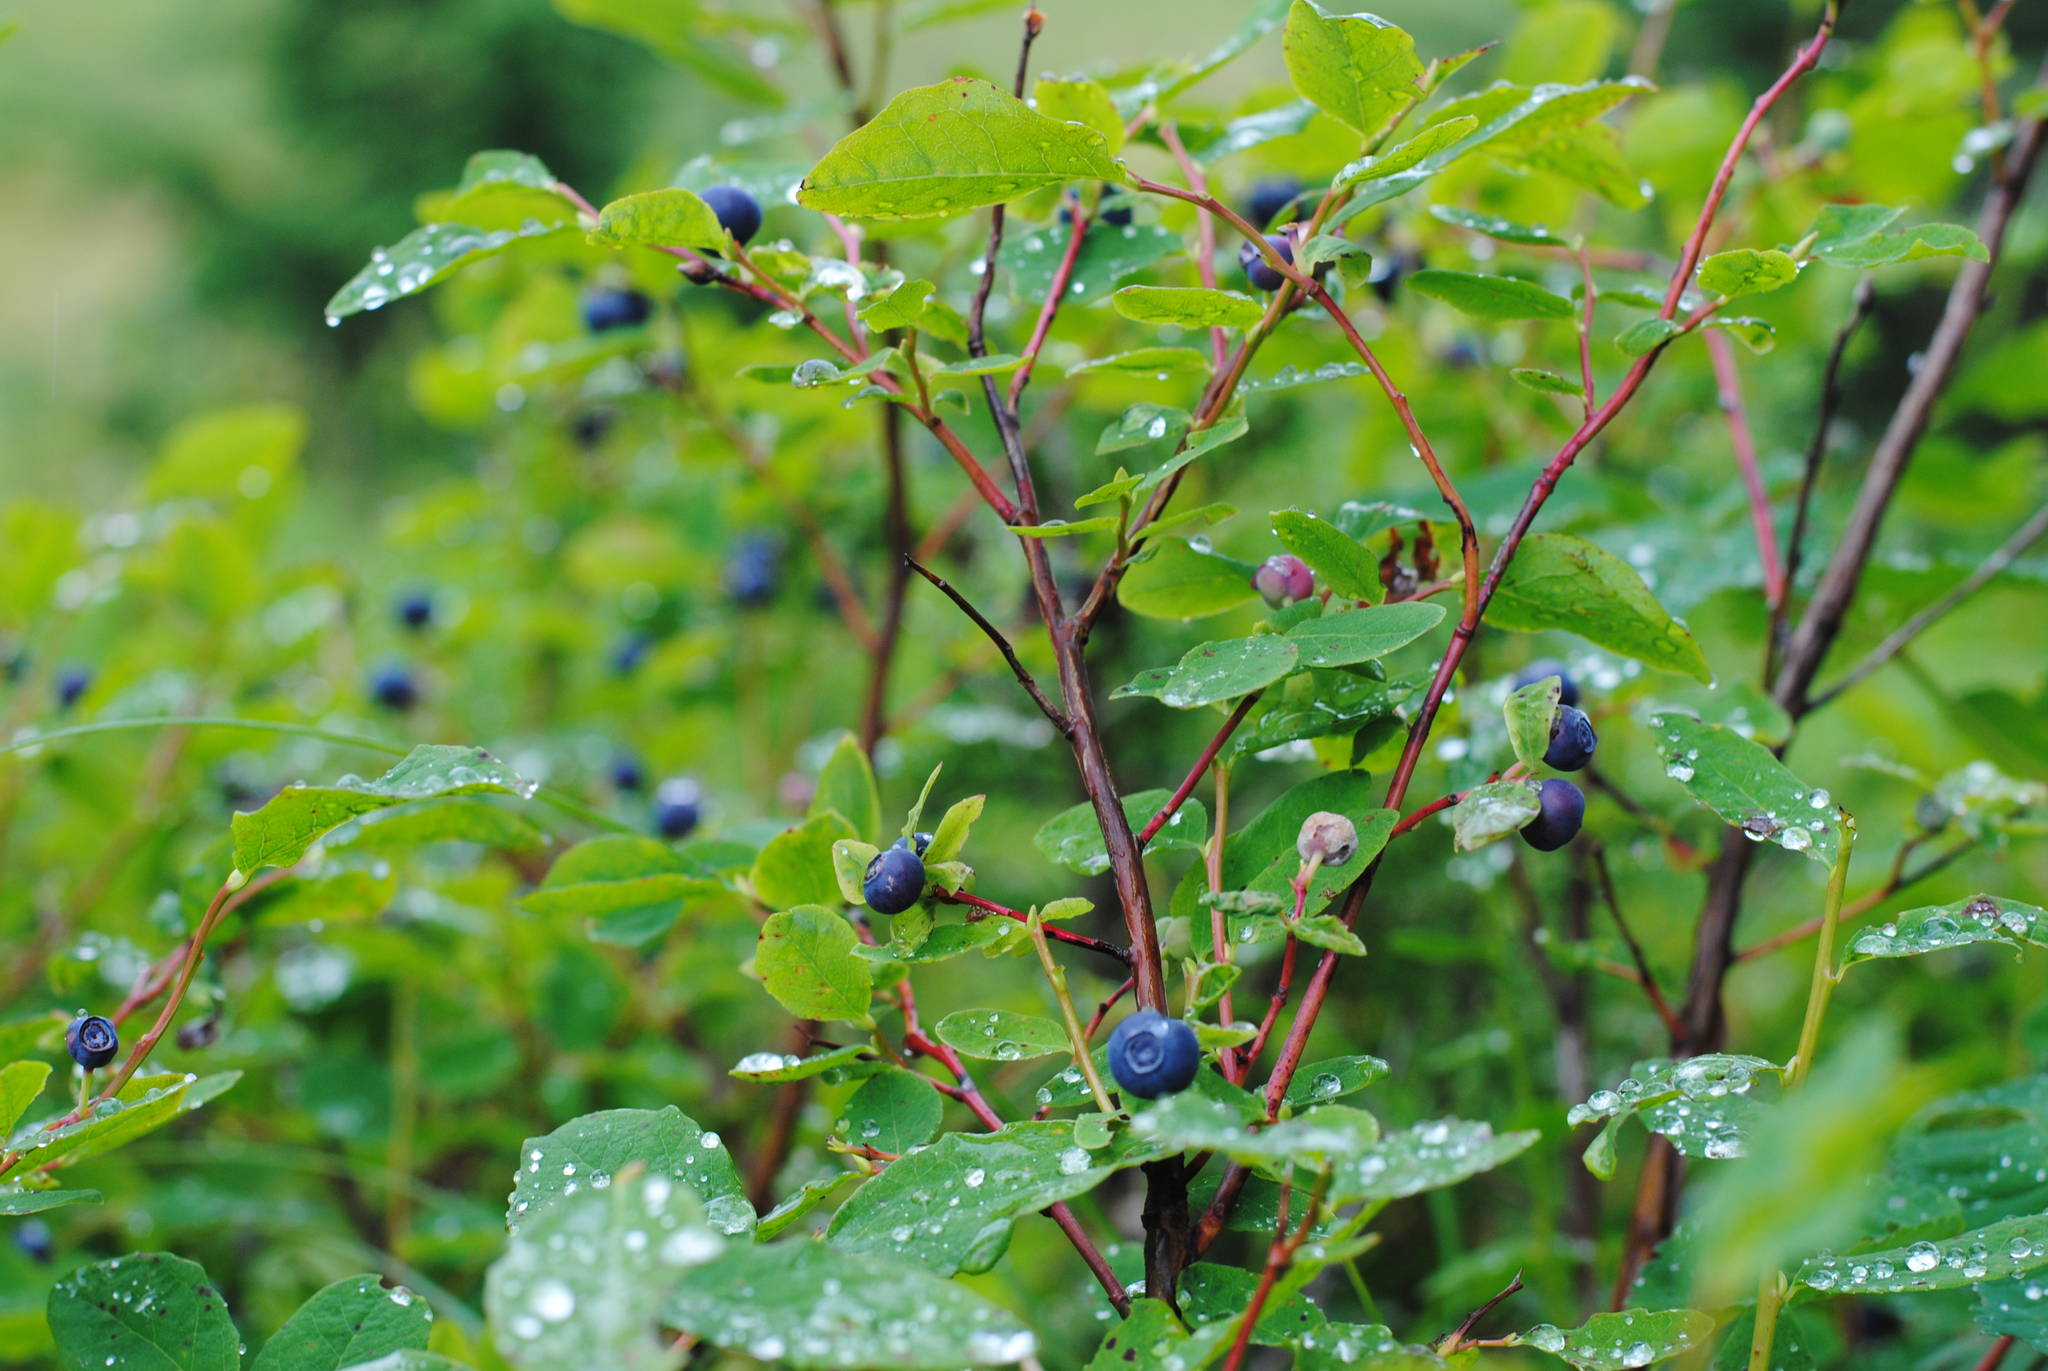 A blueberry bush on the Lost Lake Trail near Seward, Alaska is adorned with berries on Thursday, August 17, 2017. The Winterberry project is looking for volunteers to monitor the berries they see with a focus on lowbush cranberry, crowberry, prickly rose and highbush cranberry, although all berries, even blueberries, may be monitored. (Photo by Kat Sorensen/Peninsula Clarion)